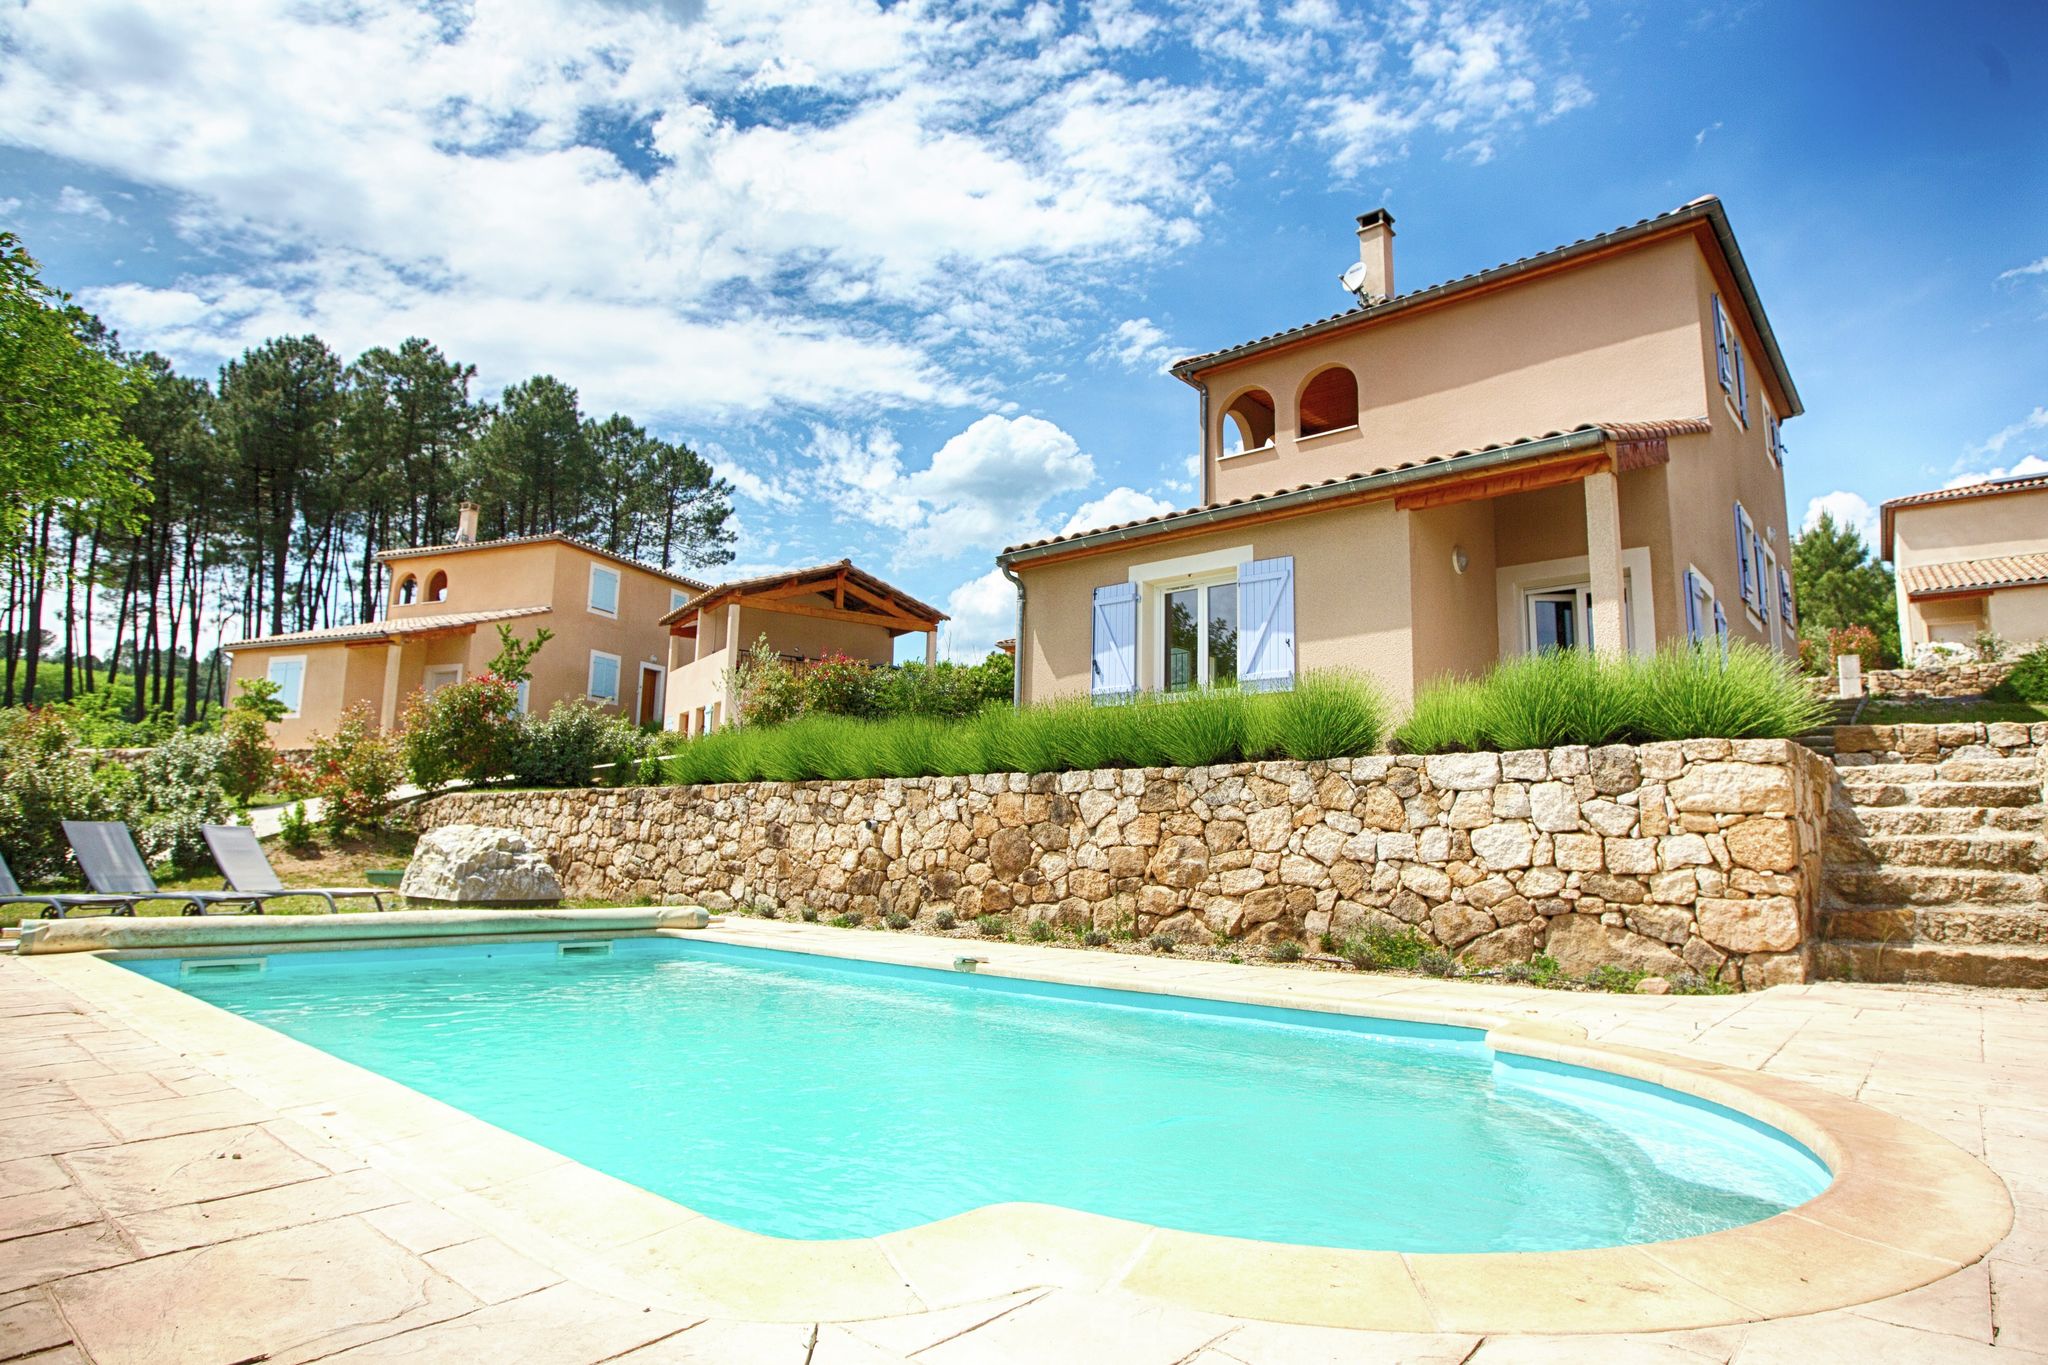 Beautifully located holiday villa with private swimming pool and lovely view!